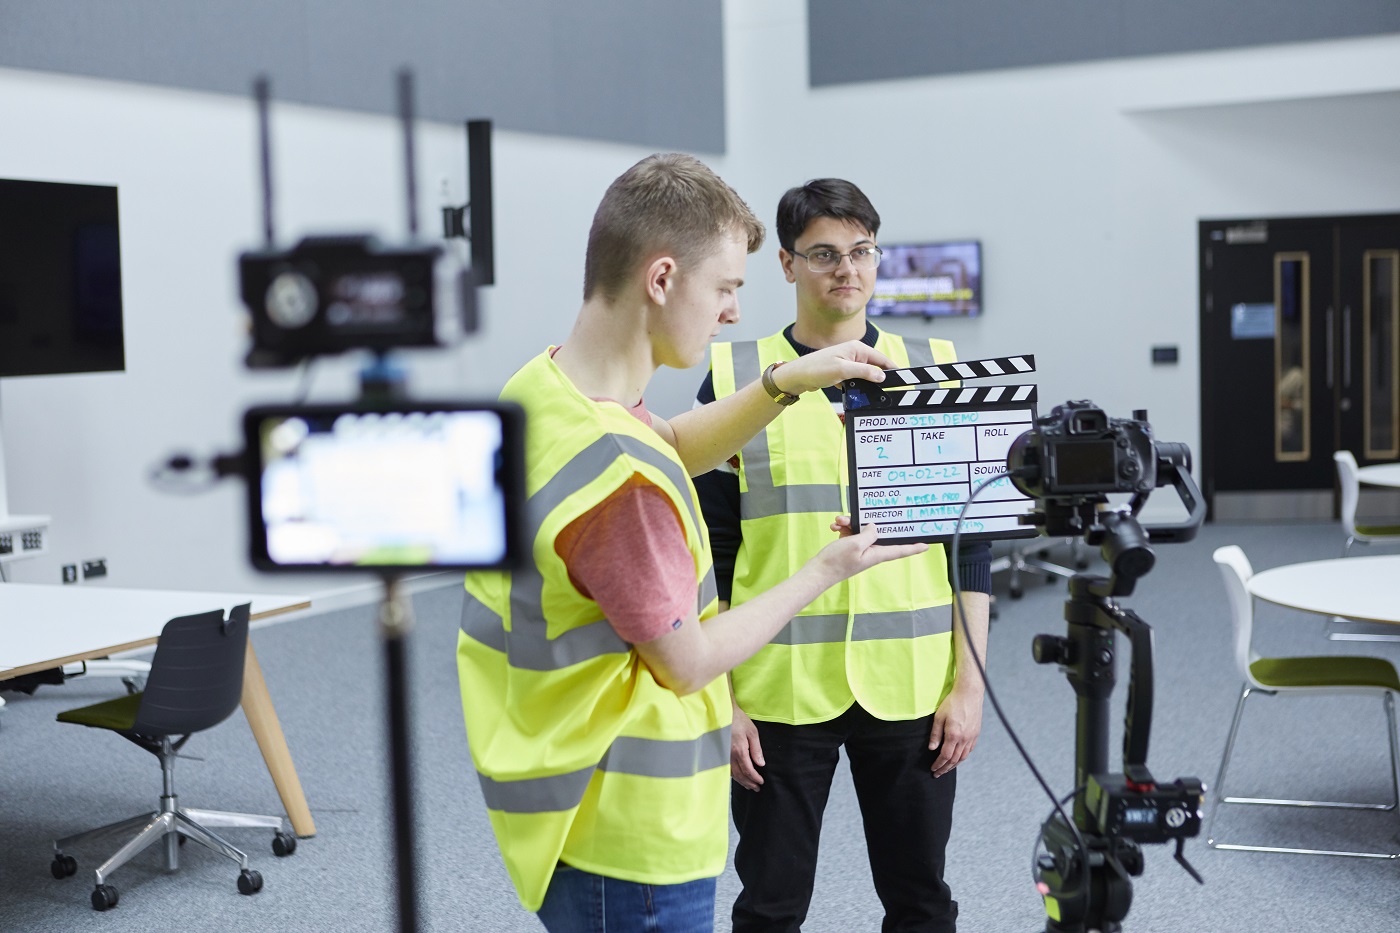 One student holds a clapperboard in front of a camera, while another stands behind.